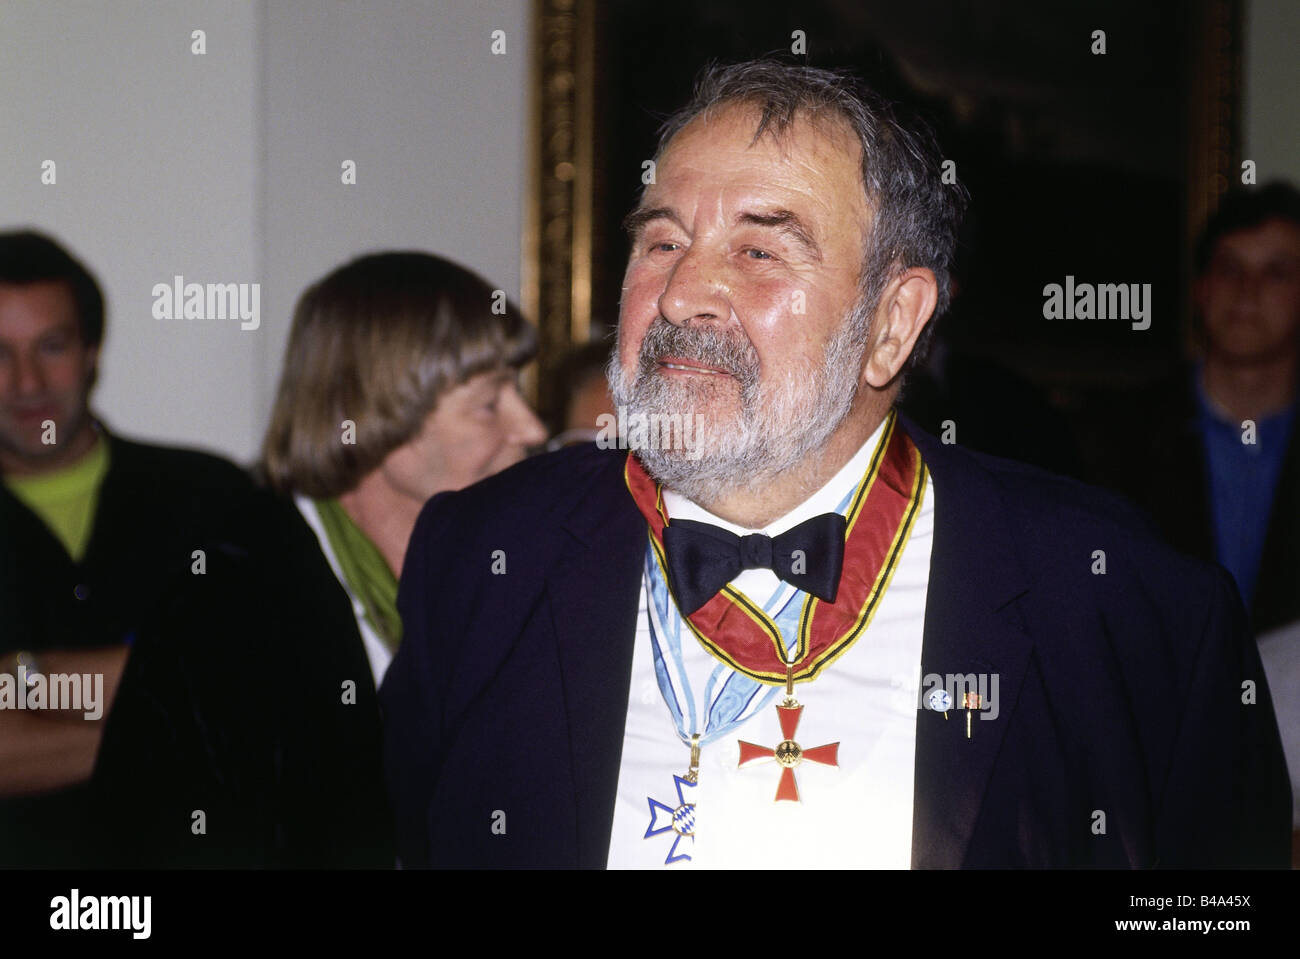 Buchheim, Lothar-Günther, 6.2.1918 - 22.2.2007, German publisher and writer, portrait, at the swearing-in ceremony of the elected mayor, town hall Feldafing, May 1990, Stock Photo